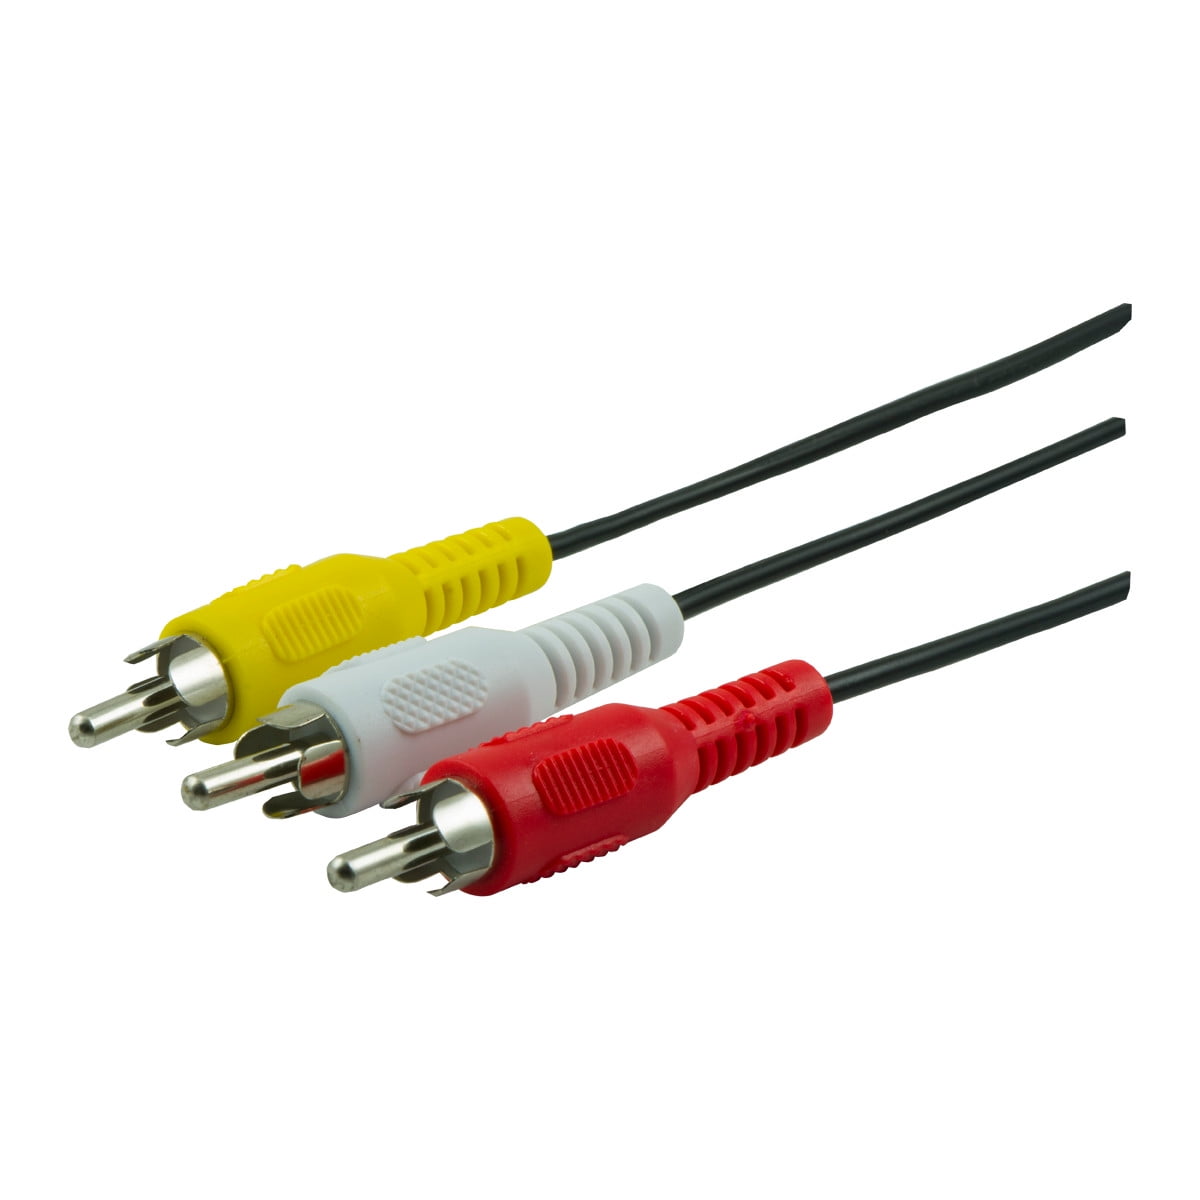 GE 12 ft. Audio Video Cable, RCA Red White Yellow Plugs,